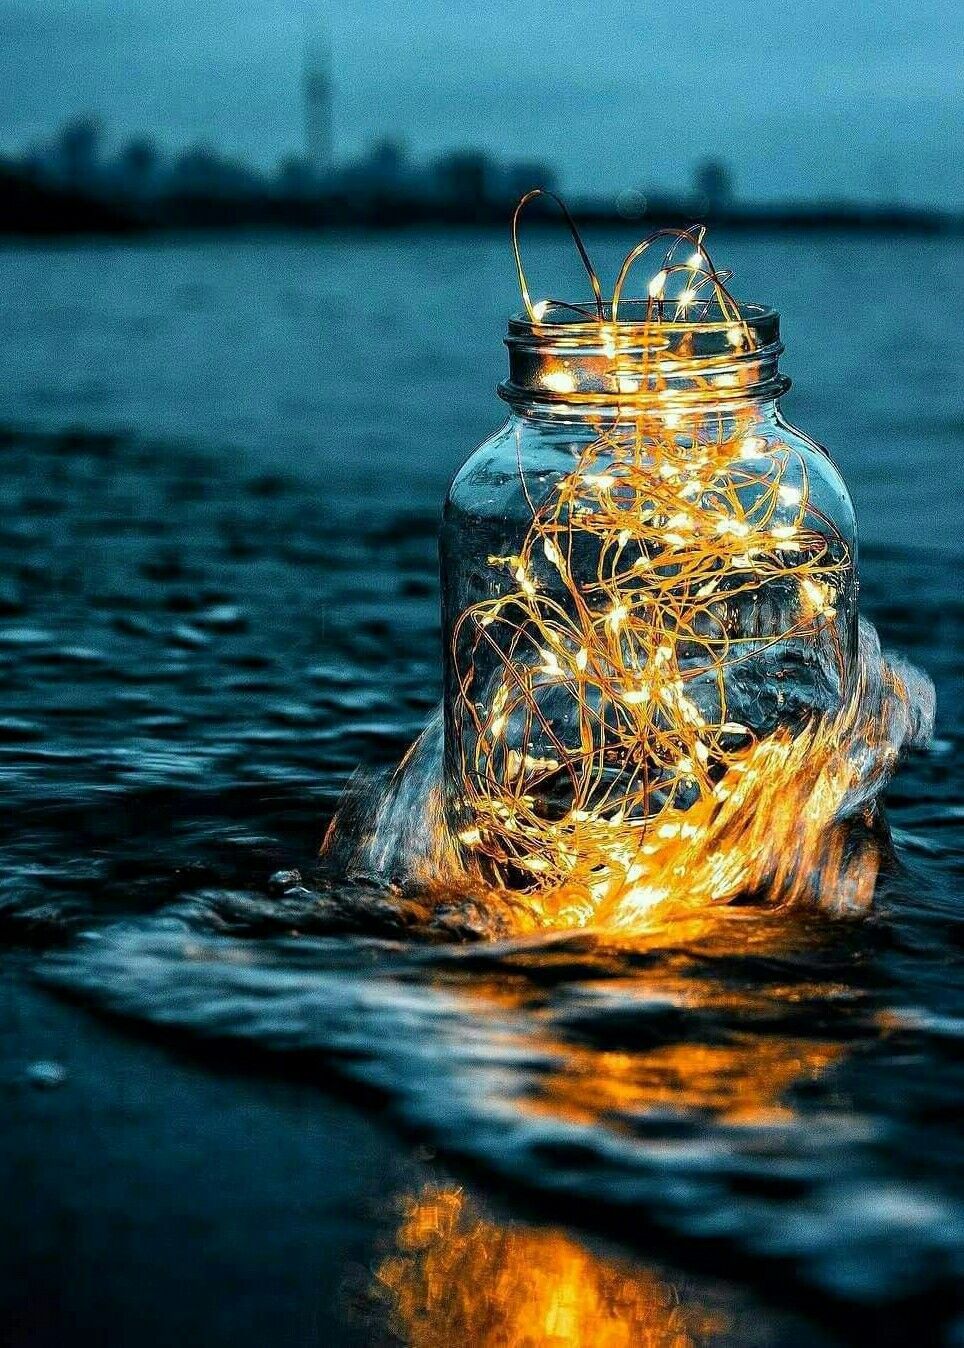 A jar filled with fairy lights floating on the water - Fairy lights